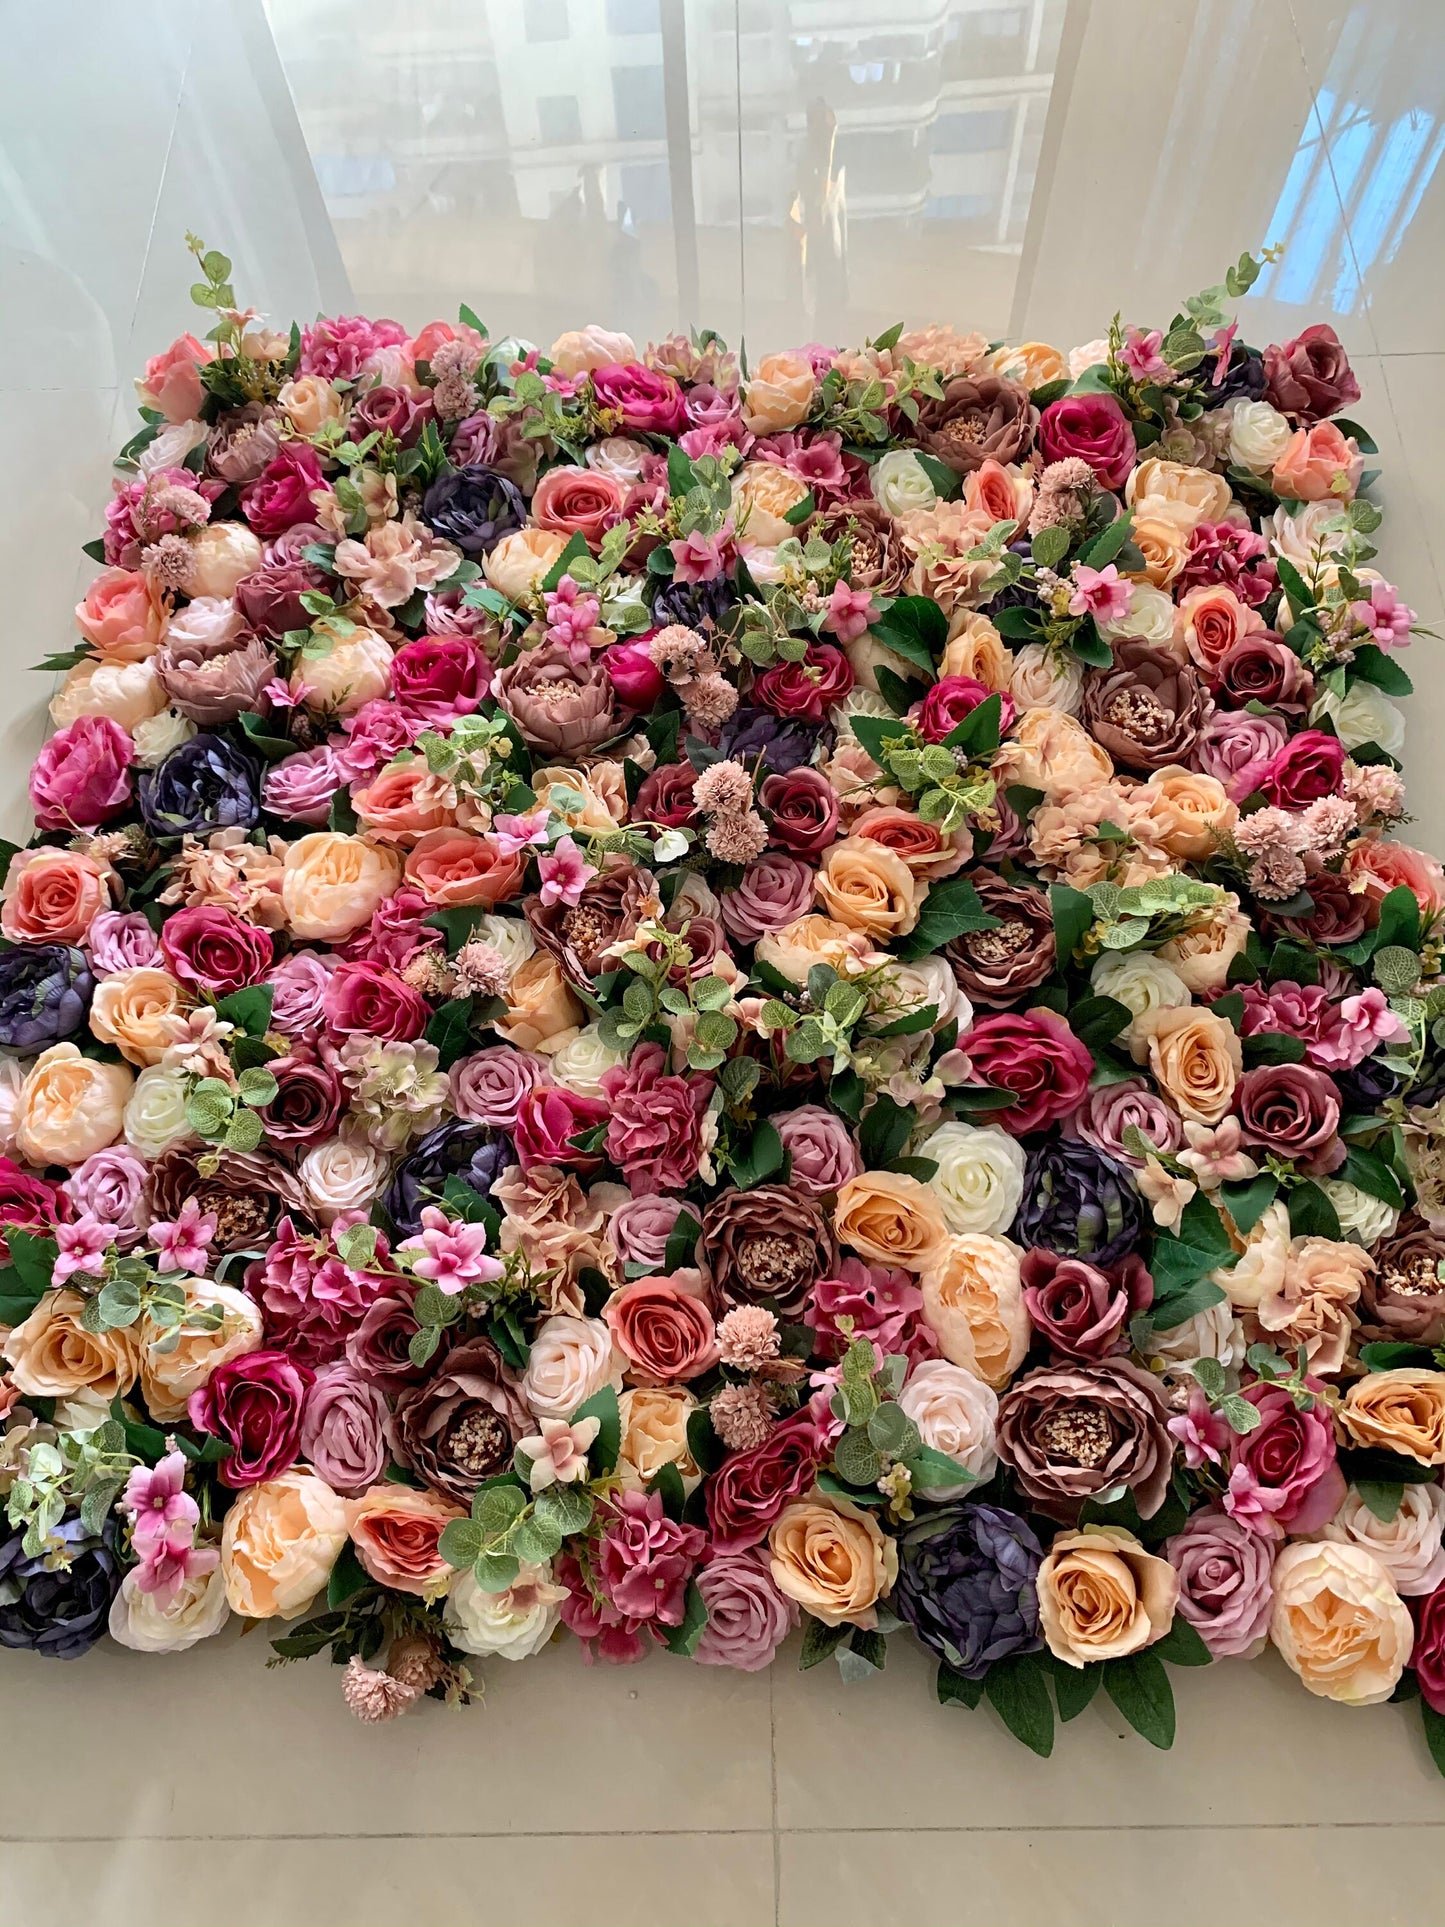 New Design Artifical Flower Wall For Wedding Arrangement Event Salon Party Photography Backdrop Fabric Rolling Up Curtain Fabric Cloth